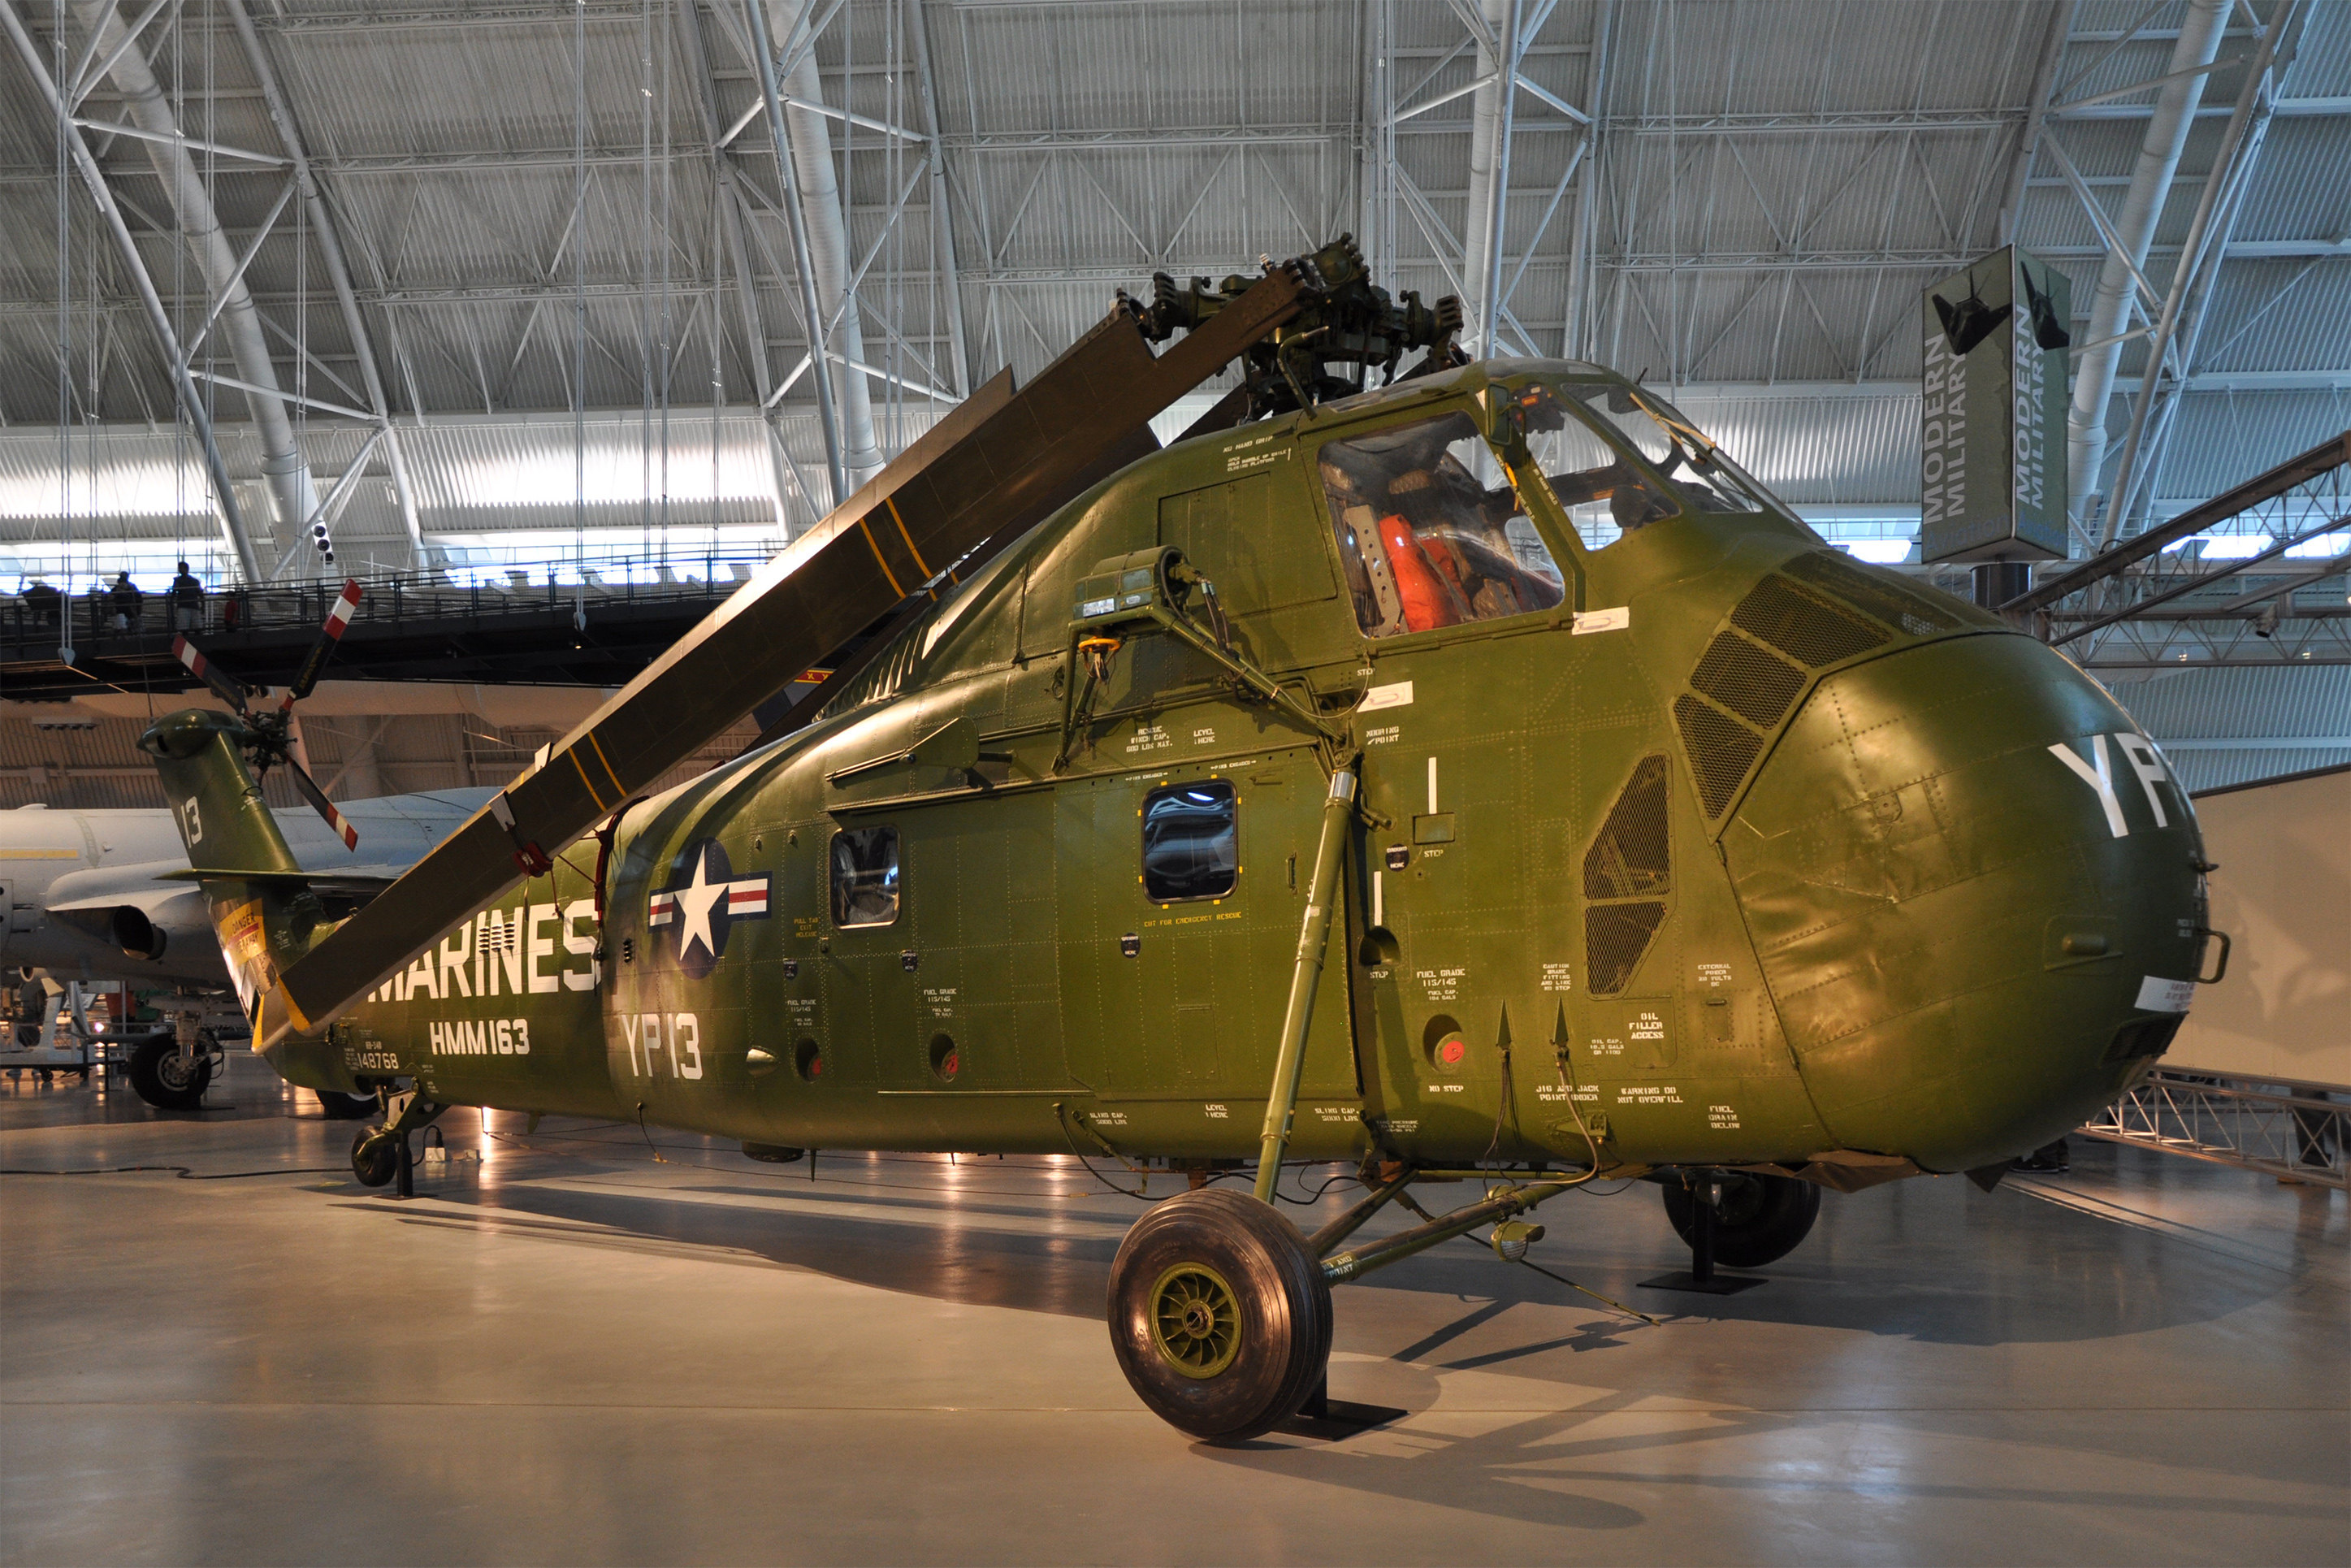 https://static.wikia.nocookie.net/aircraft/images/e/e9/Sikorsky_UH-34D_Seahorse.jpg/revision/latest?cb=20130201235411